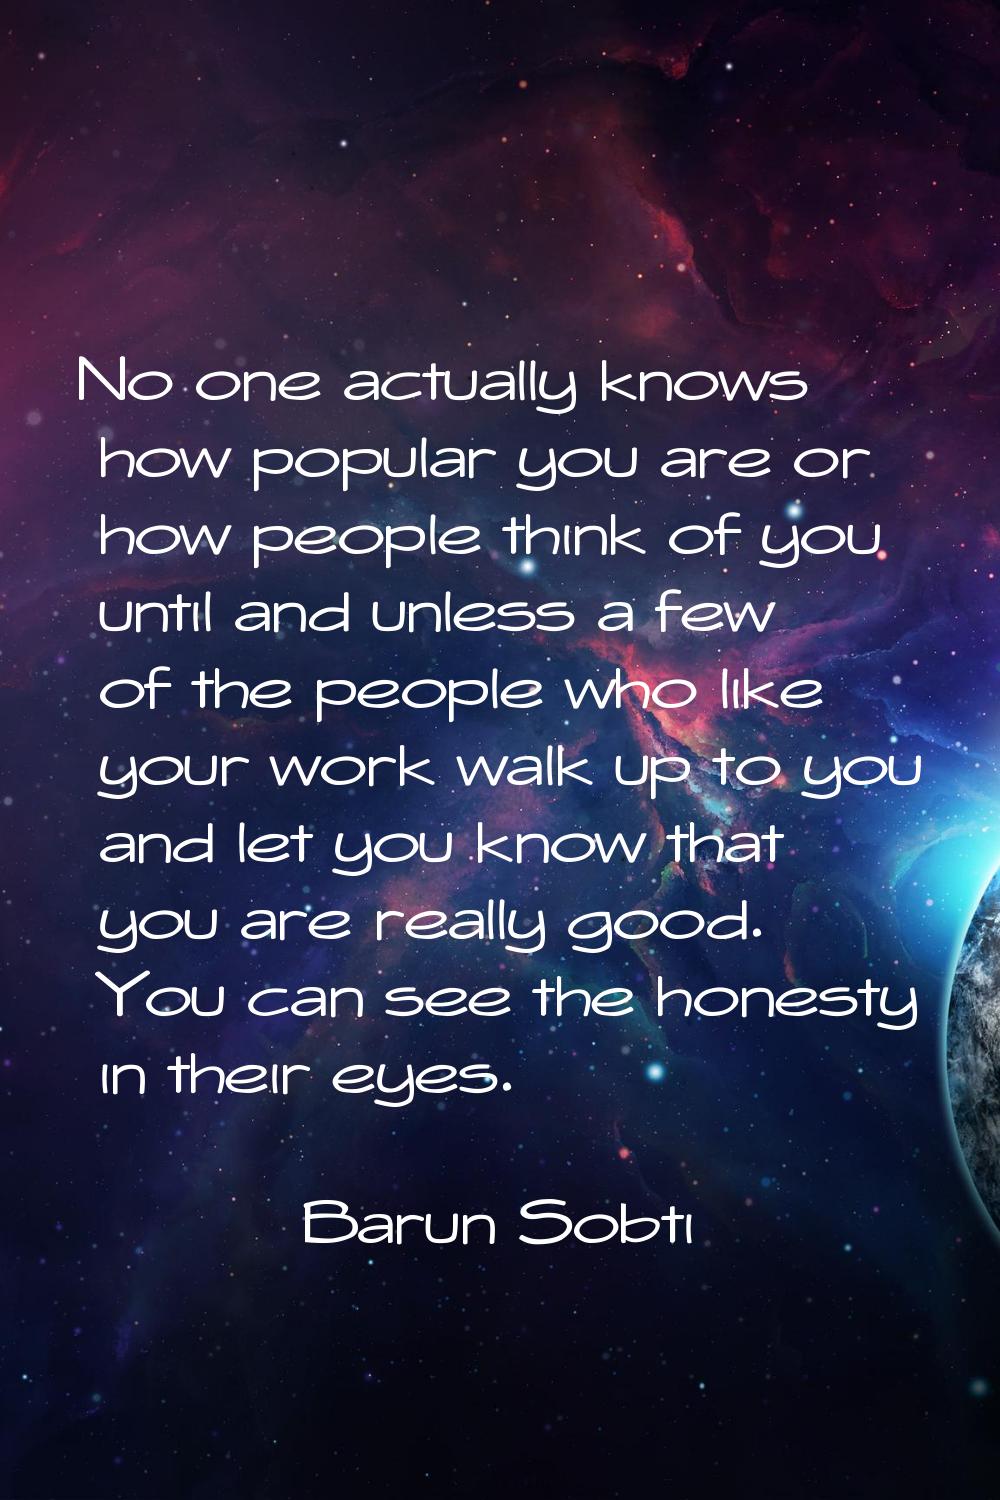 No one actually knows how popular you are or how people think of you until and unless a few of the 